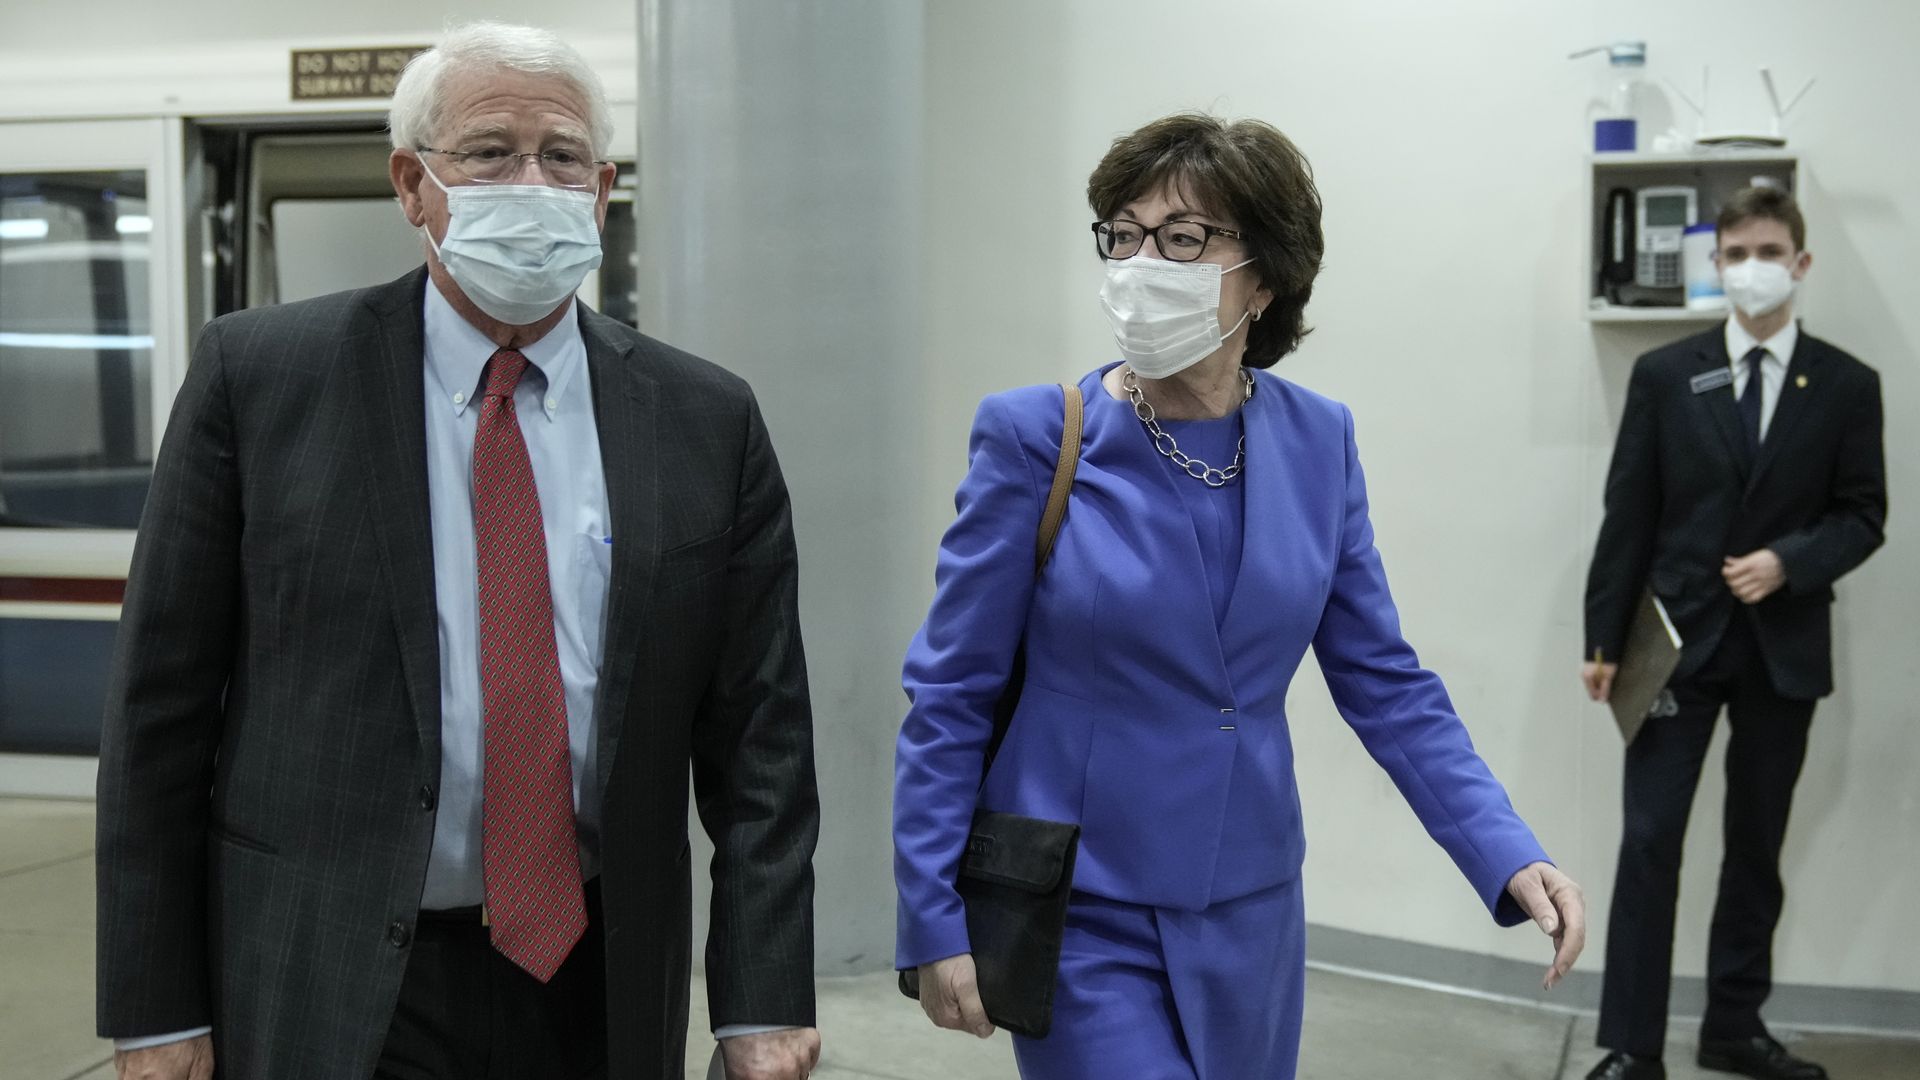 Sen. Susan Collins is seen walking into the Capitol basement on Wednesday.